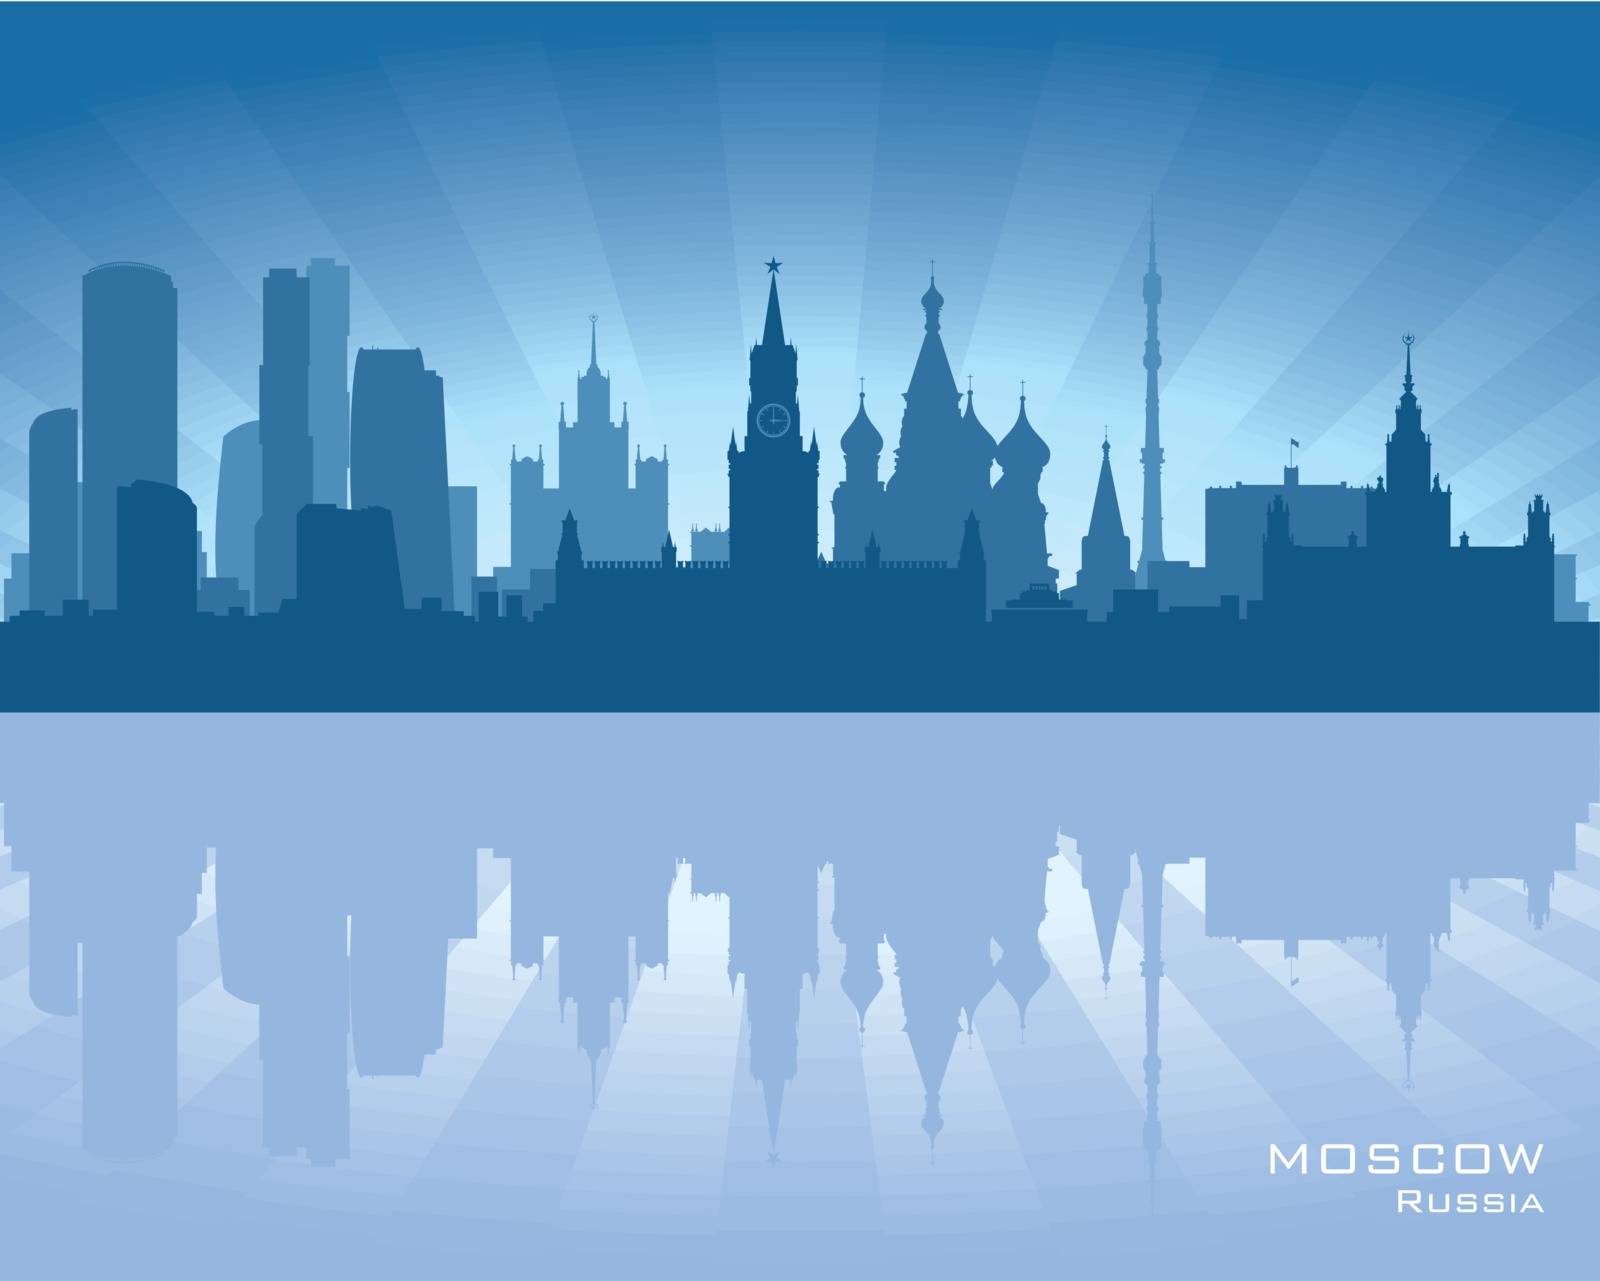 Moscow, Russia skyline illustration with reflection in water